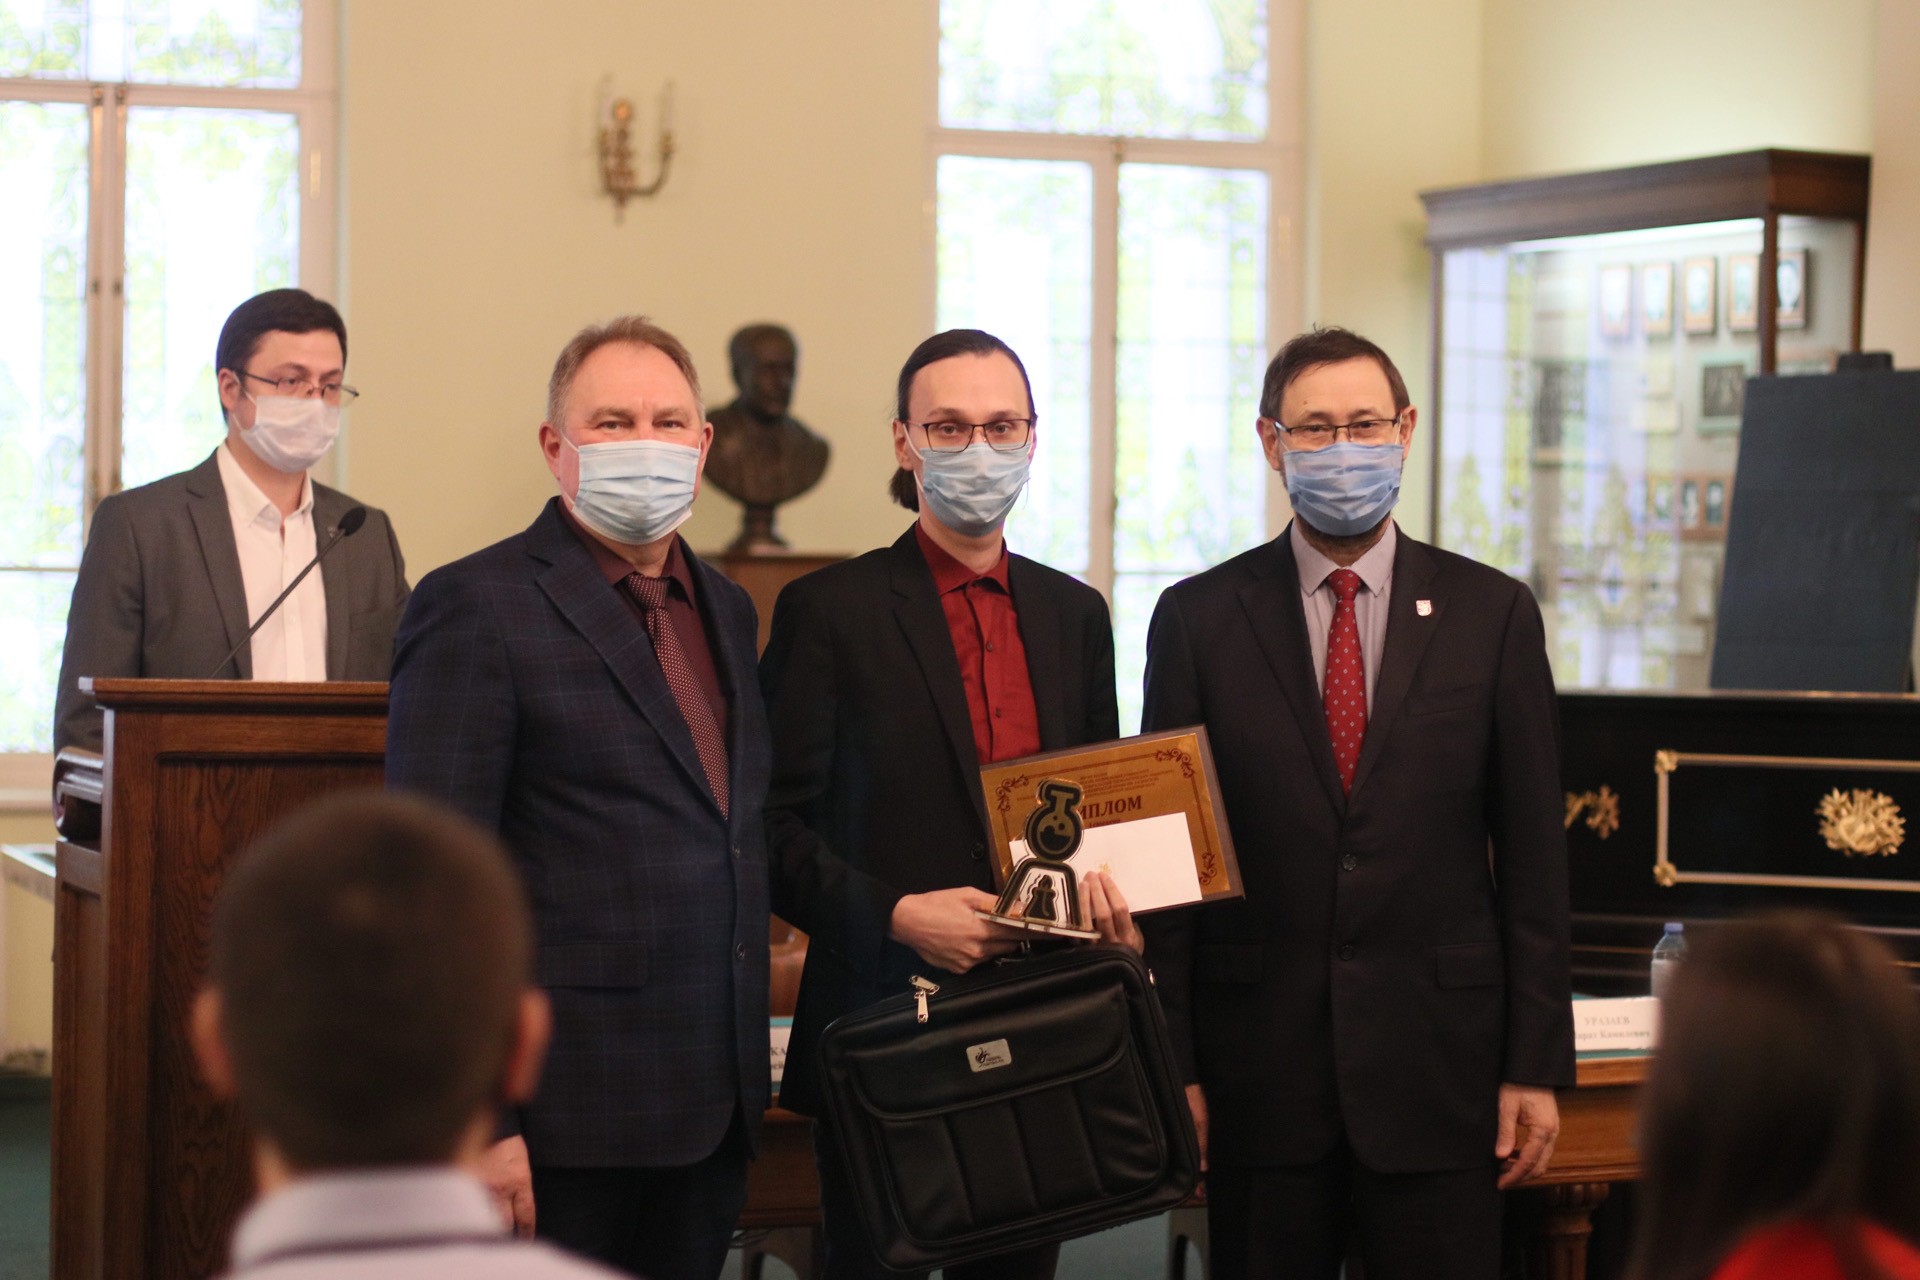 Arbuzov Prize for Young Scientists in Chemistry given to two employees of Kazan Federal University ,IC, Arbuzov Prize